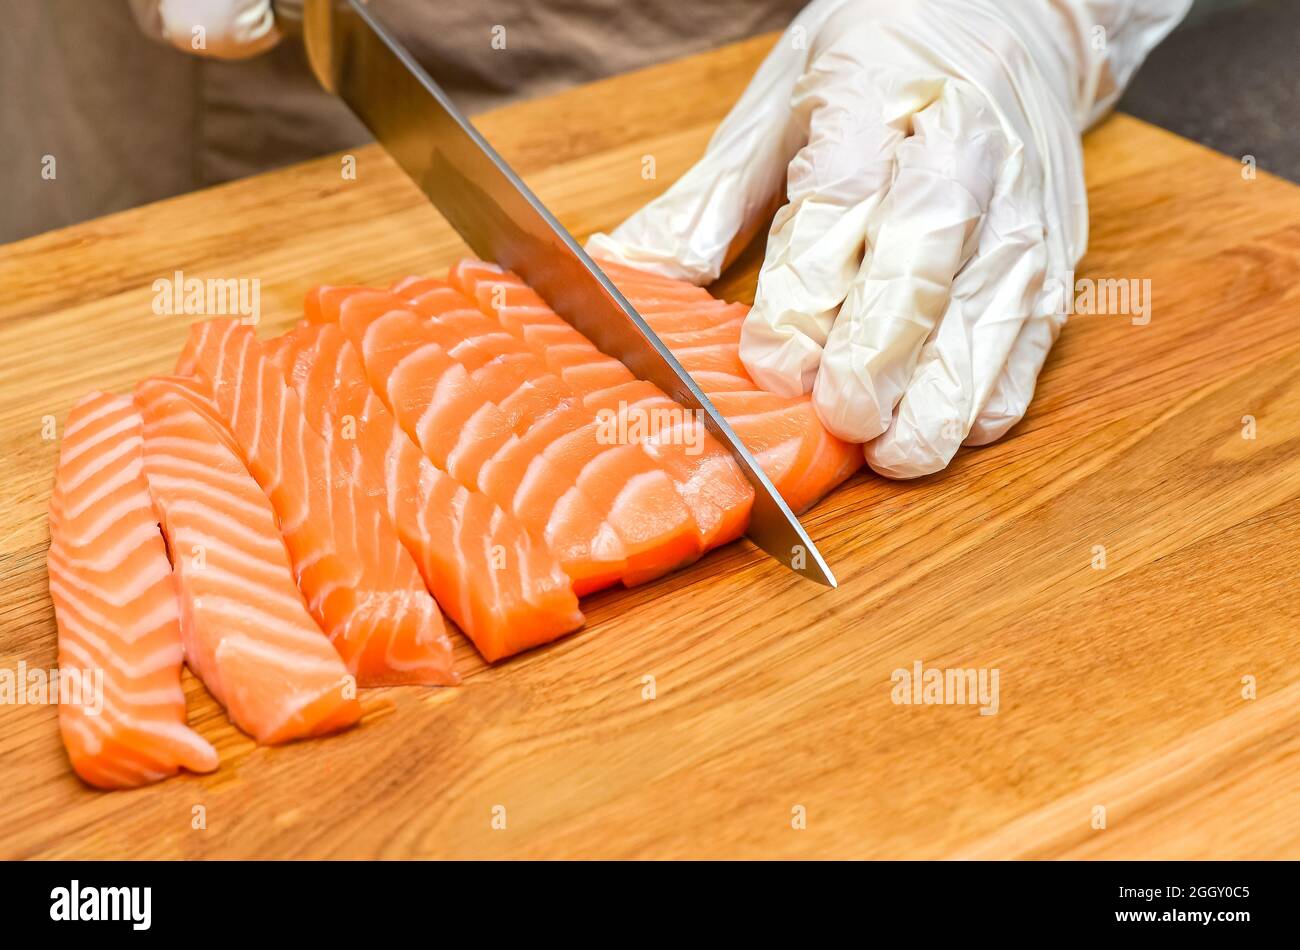 Chef's hands close up. On a wooden cutting board, the chef cuts a red fish with a knife. Stock Photo